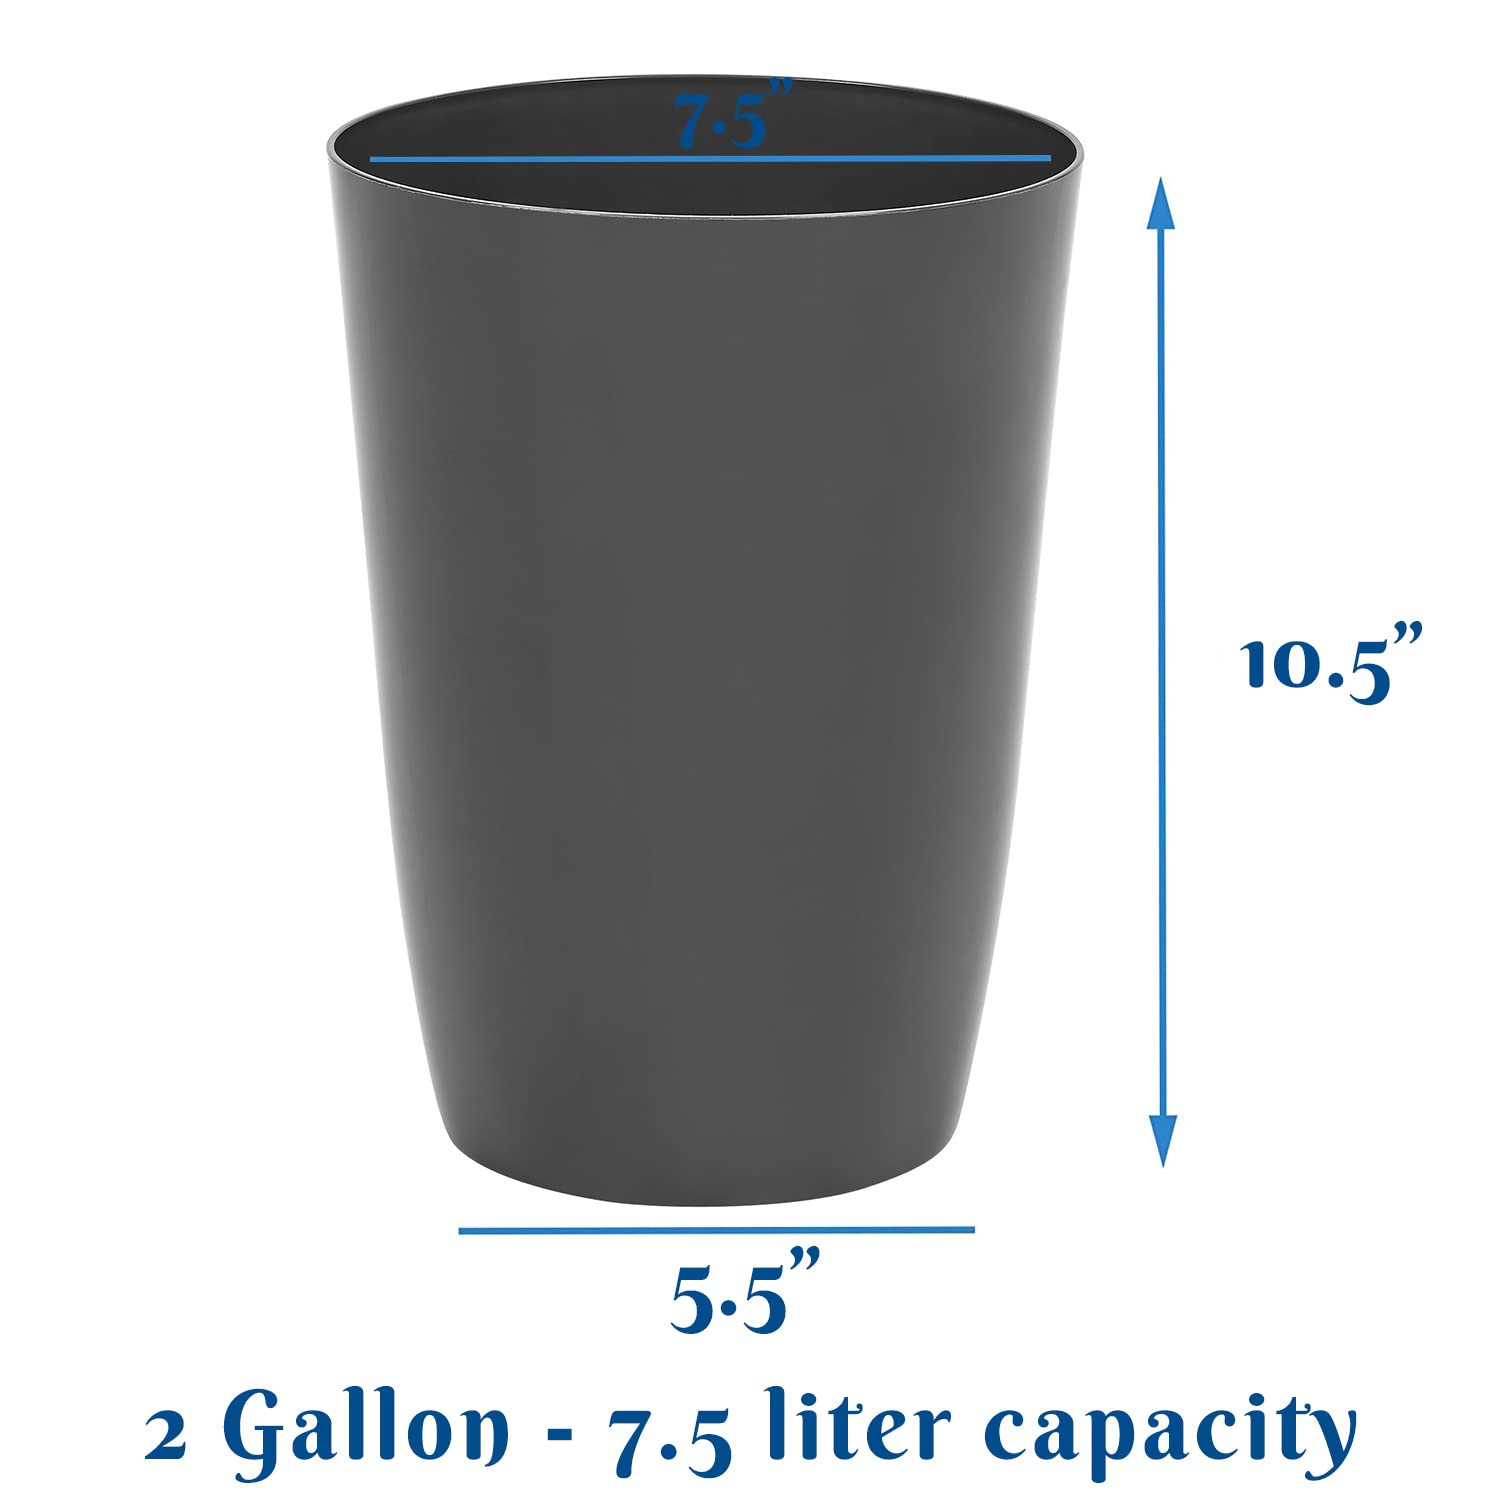 Small Trash Can – Open Top Garbage Cans for Kitchen, Office, Dorm, Bathroom, etc. –Waste Can for Compact/Tight Spaces – The Perfect Bathroom Trash Can - 2 Gallon Trash Bin – Glossy